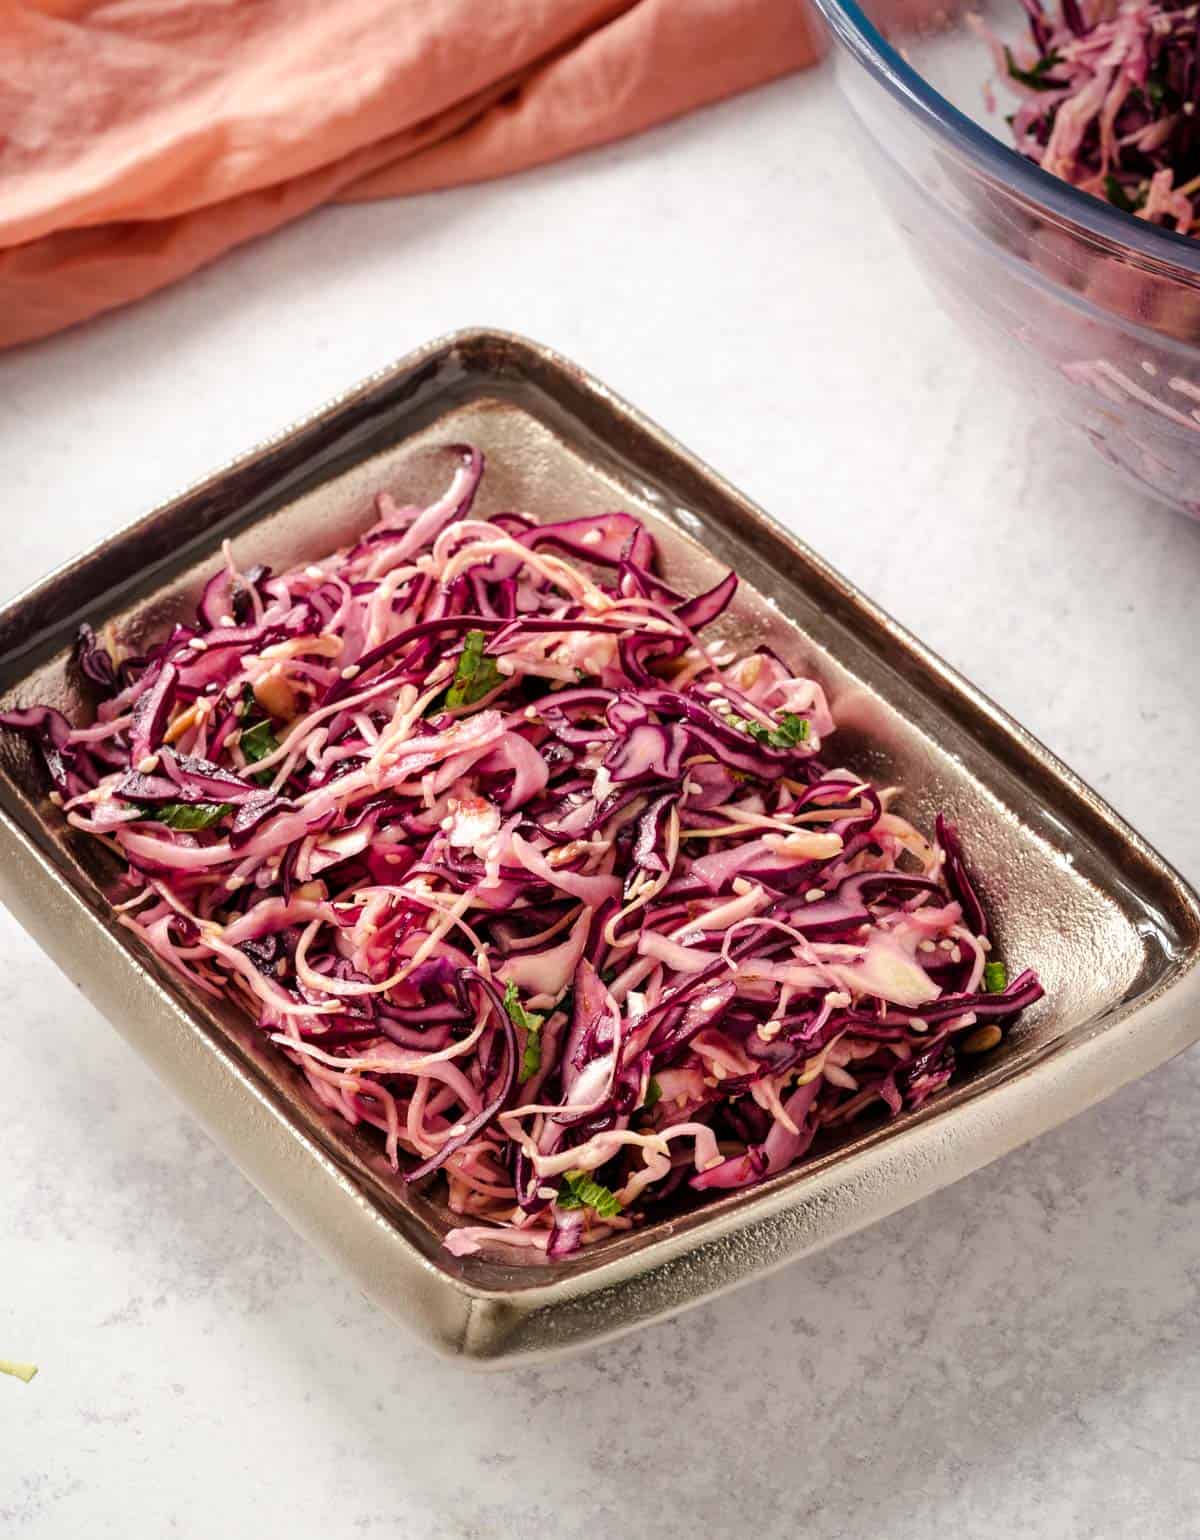 crunch cabbage salad in a metalic dish